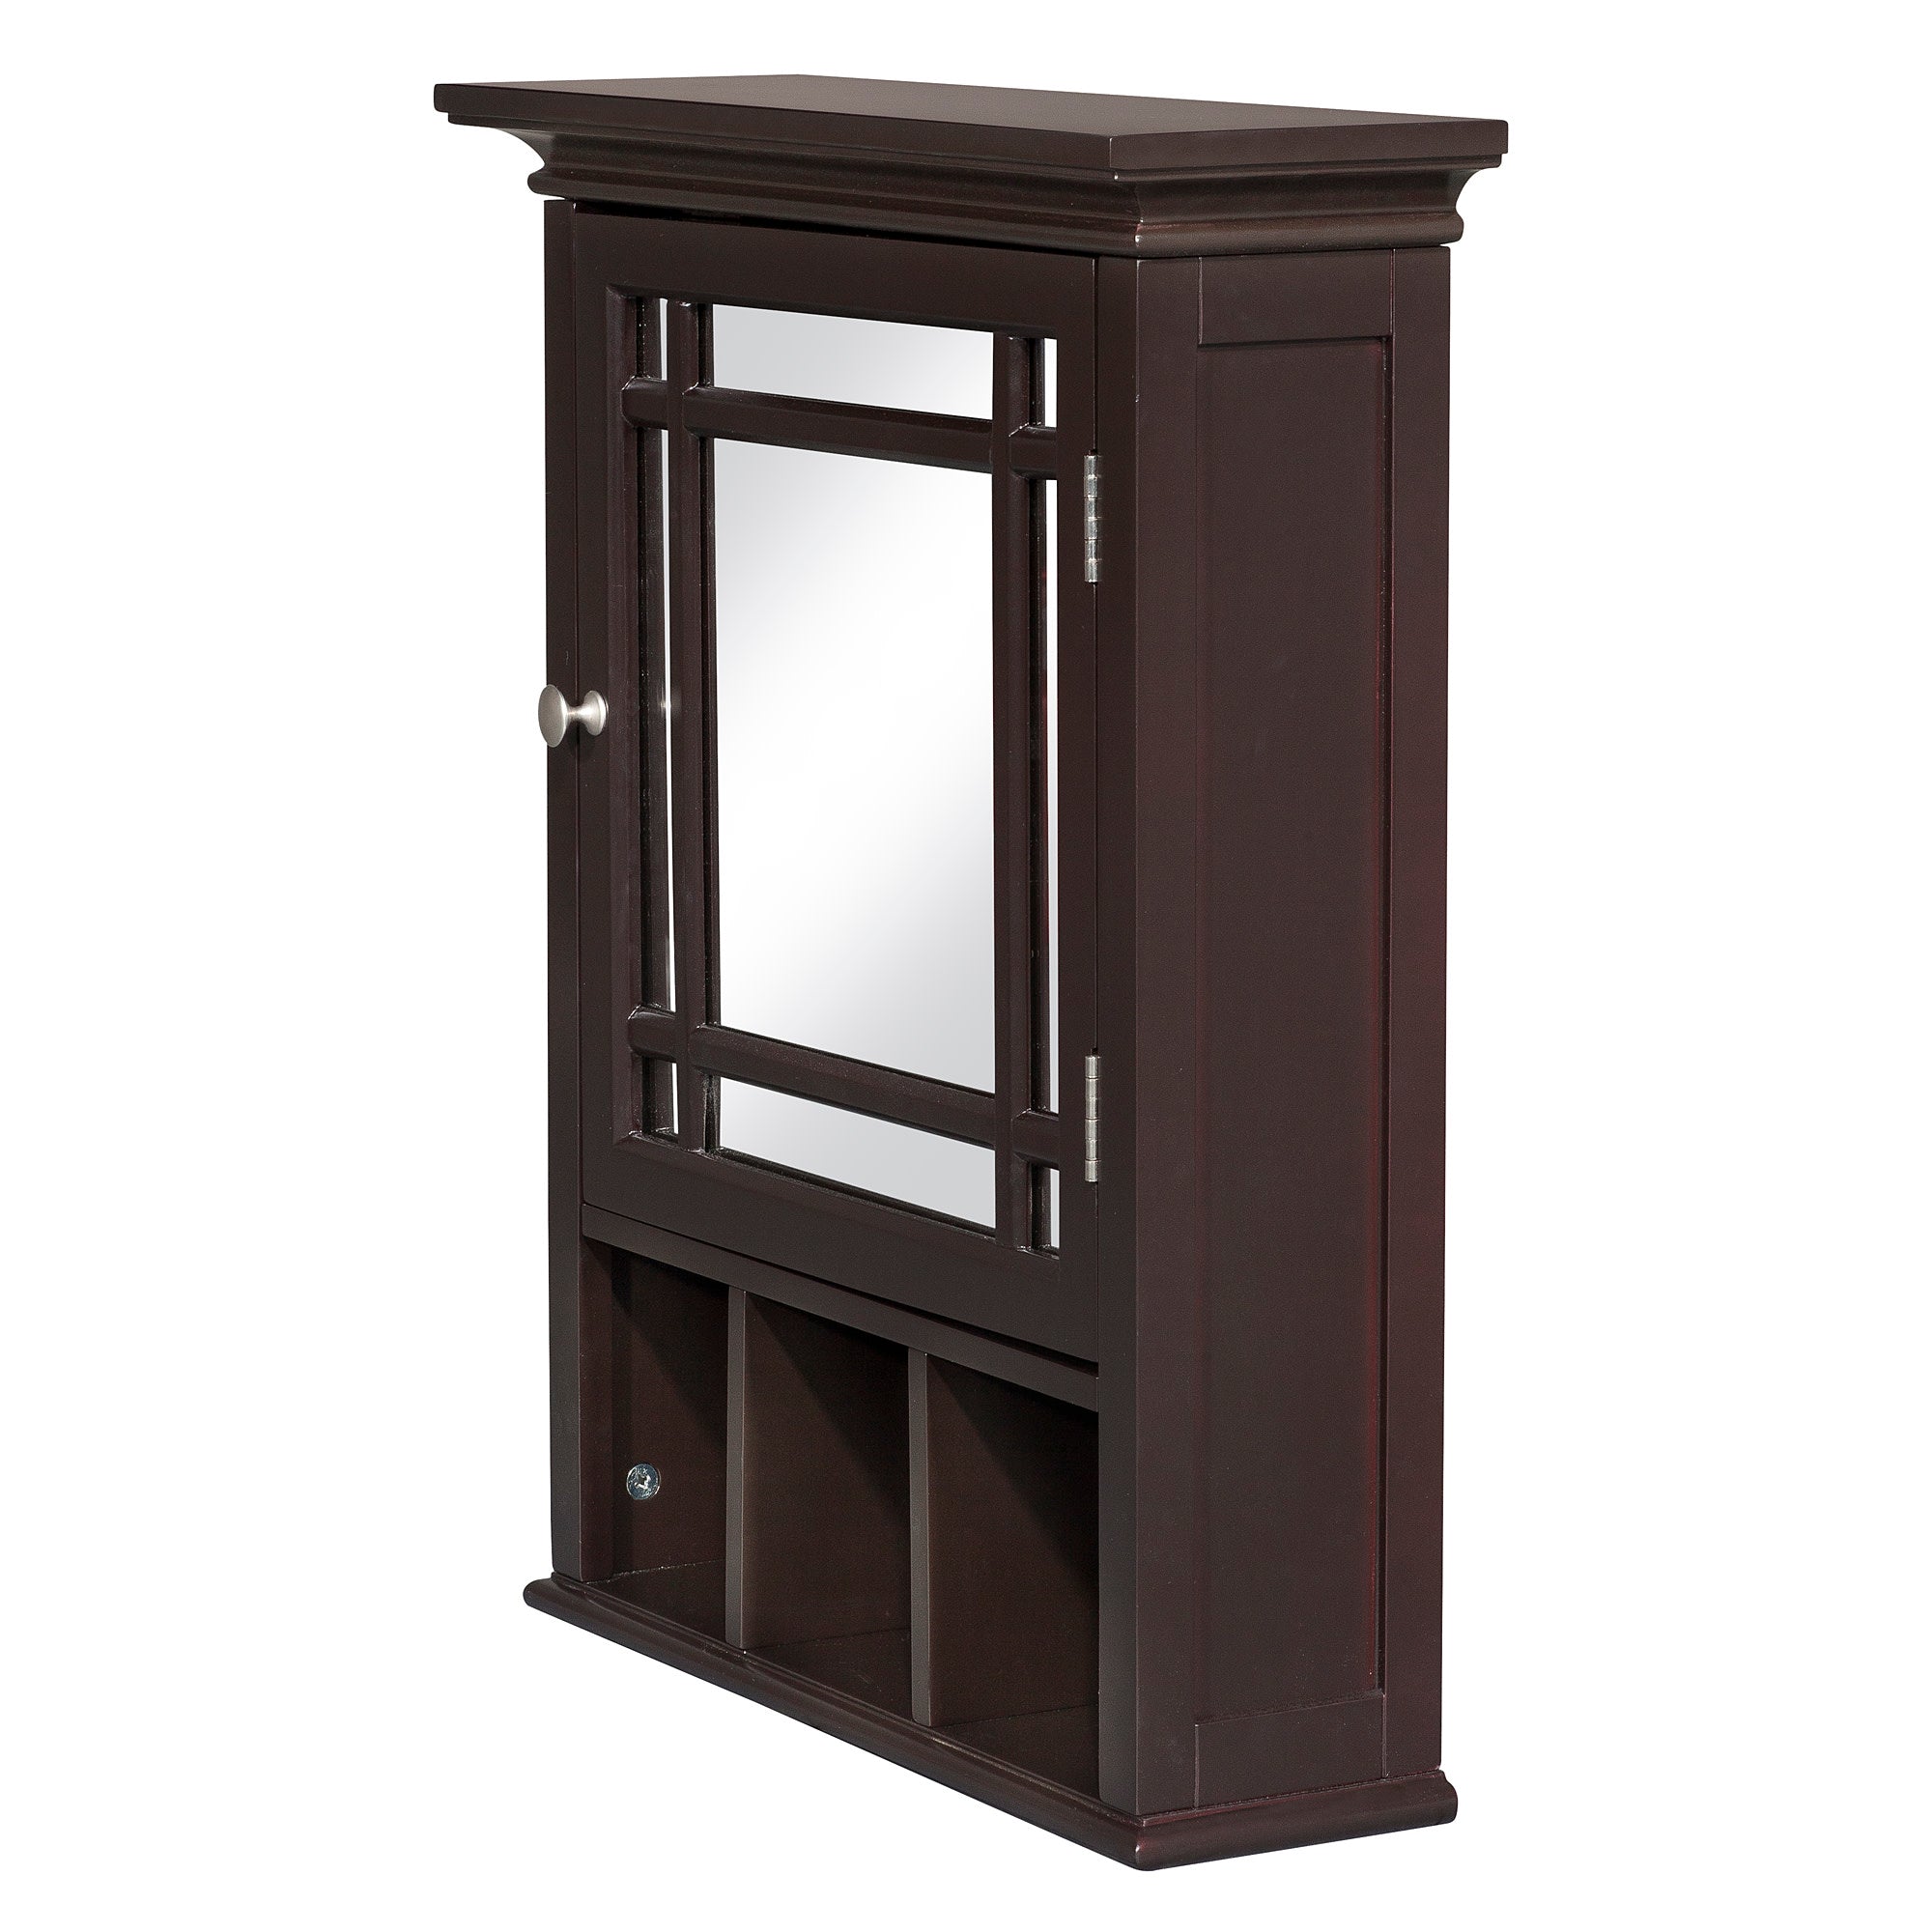 Elegant Home Fashions Neal Removable Wooden Medicine Cabinet with Mirrored Door- Espresso